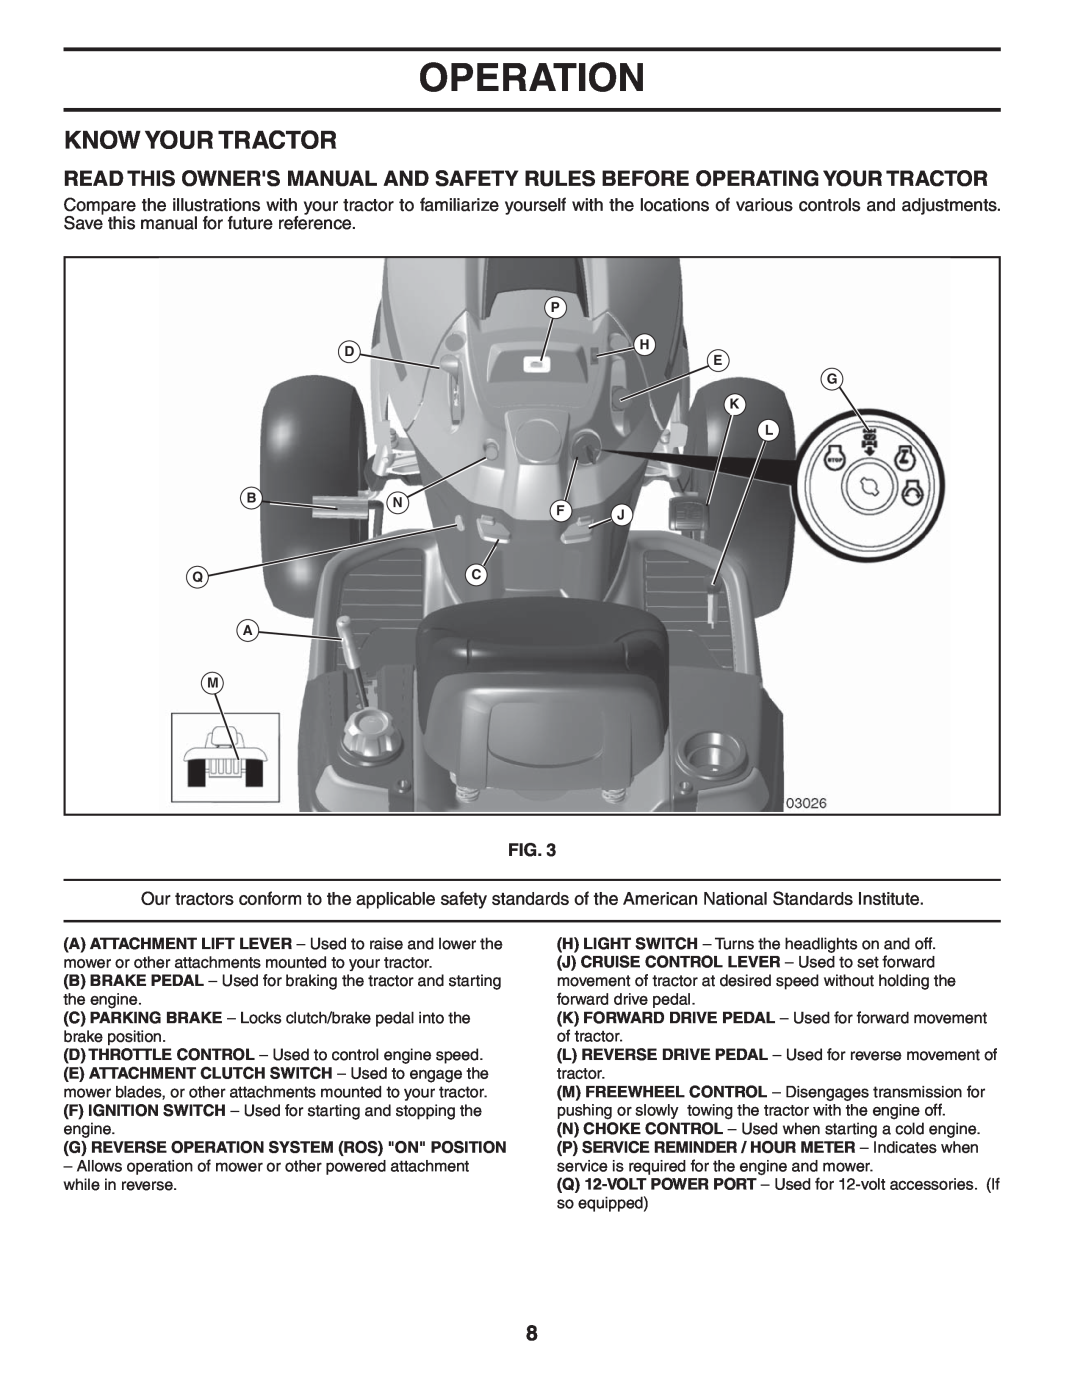 Husqvarna YTH2348 owner manual Know Your Tractor, Operation, Fig 